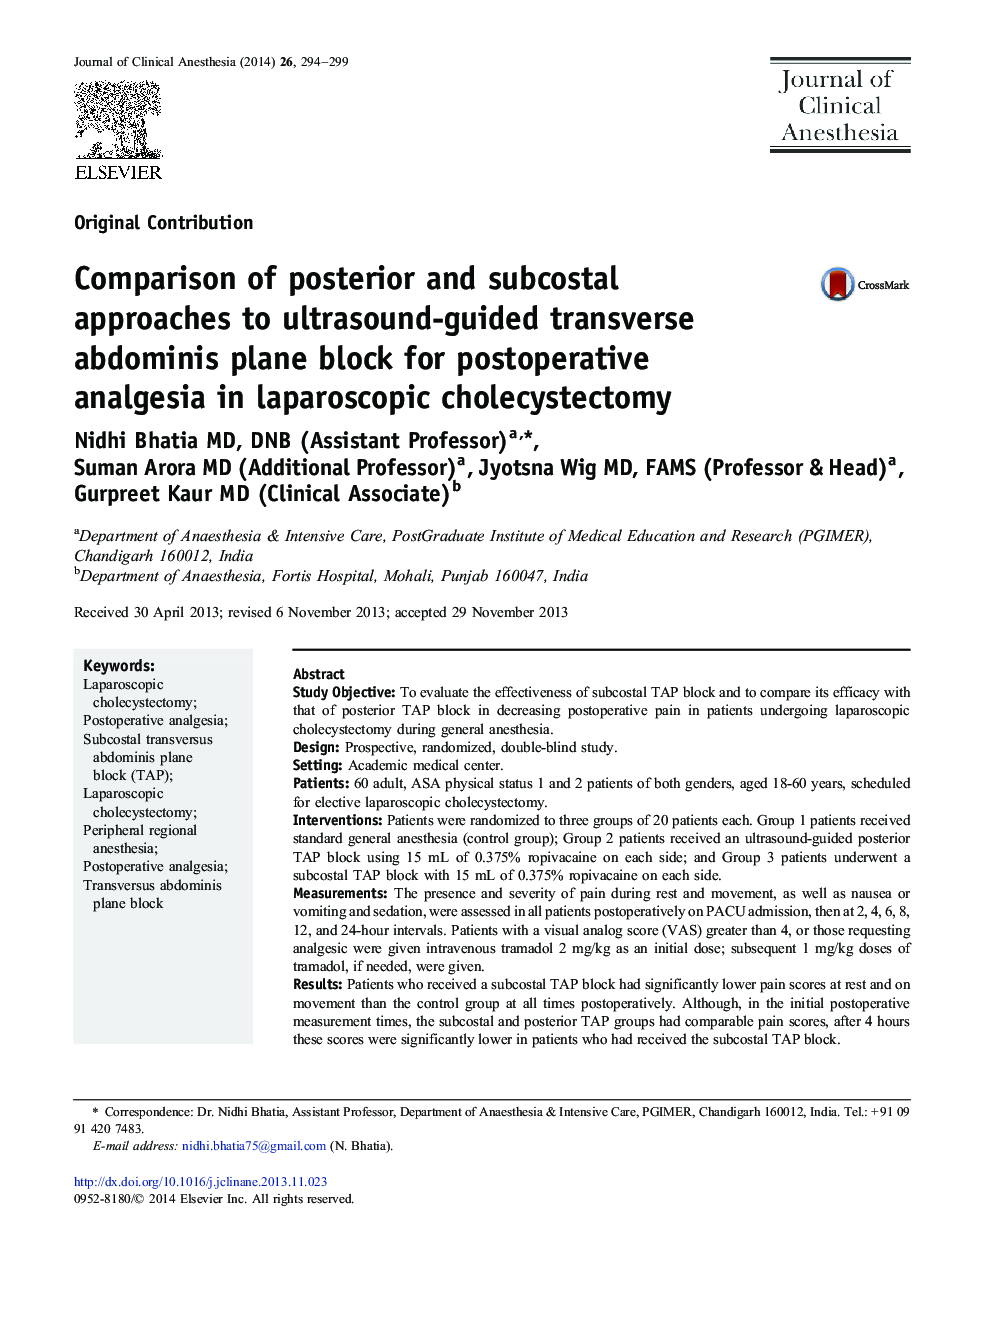 Comparison of posterior and subcostal approaches to ultrasound-guided transverse abdominis plane block for postoperative analgesia in laparoscopic cholecystectomy